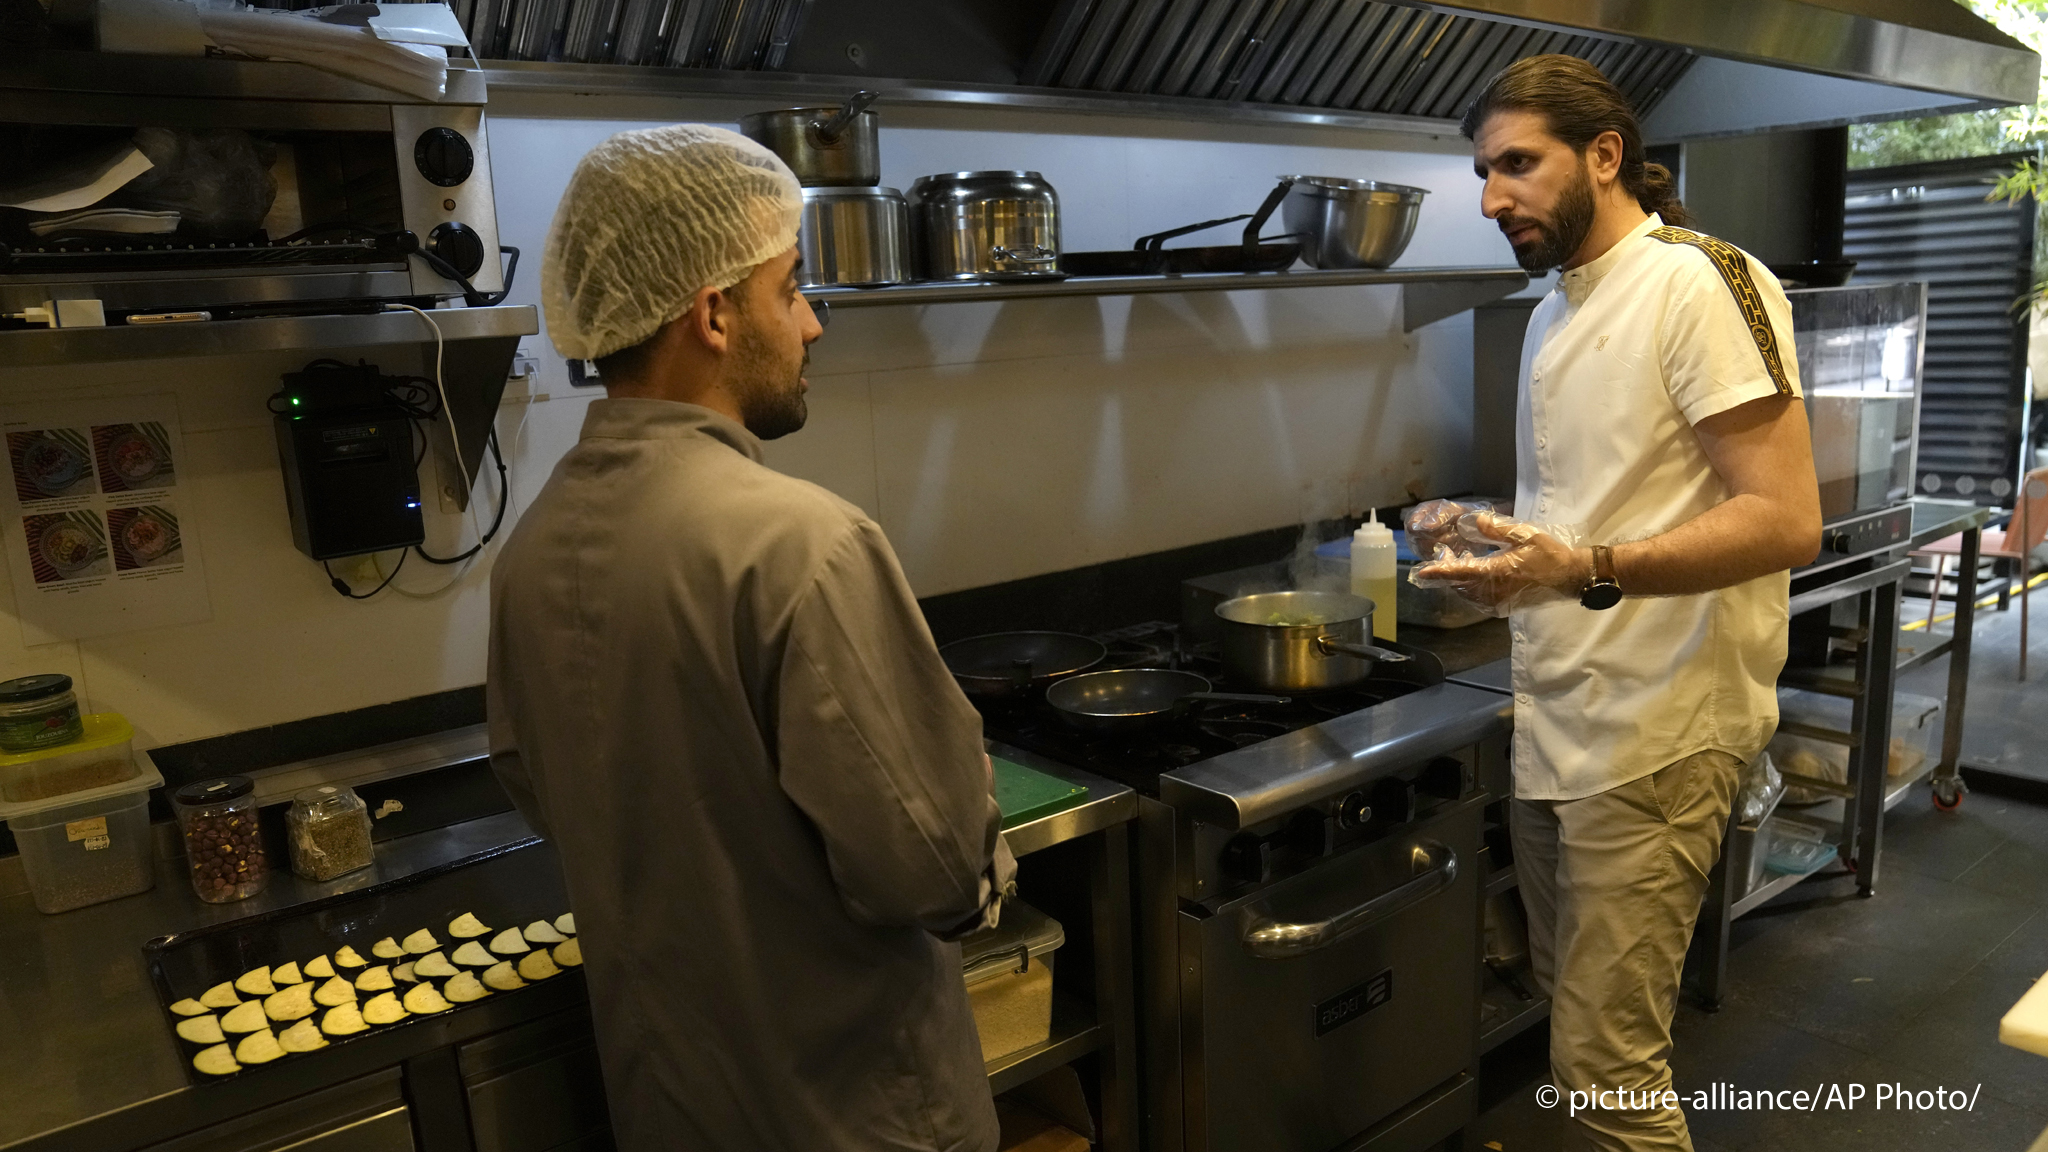 Abbas Bazzi gives directions to a chef at Le Marché Bio, the organic cafe and grocery store he co-owns, in Beirut, Lebanon, on May 30, 2023. Bazzi, who grew up in a secular family but was interested in Islam from an early age, hopes to travel to the Muslim holy city of Mecca, Saudi Arabia, for his fourth Hajj pilgrimage this month (image: AP Photo/Hussein Malla)